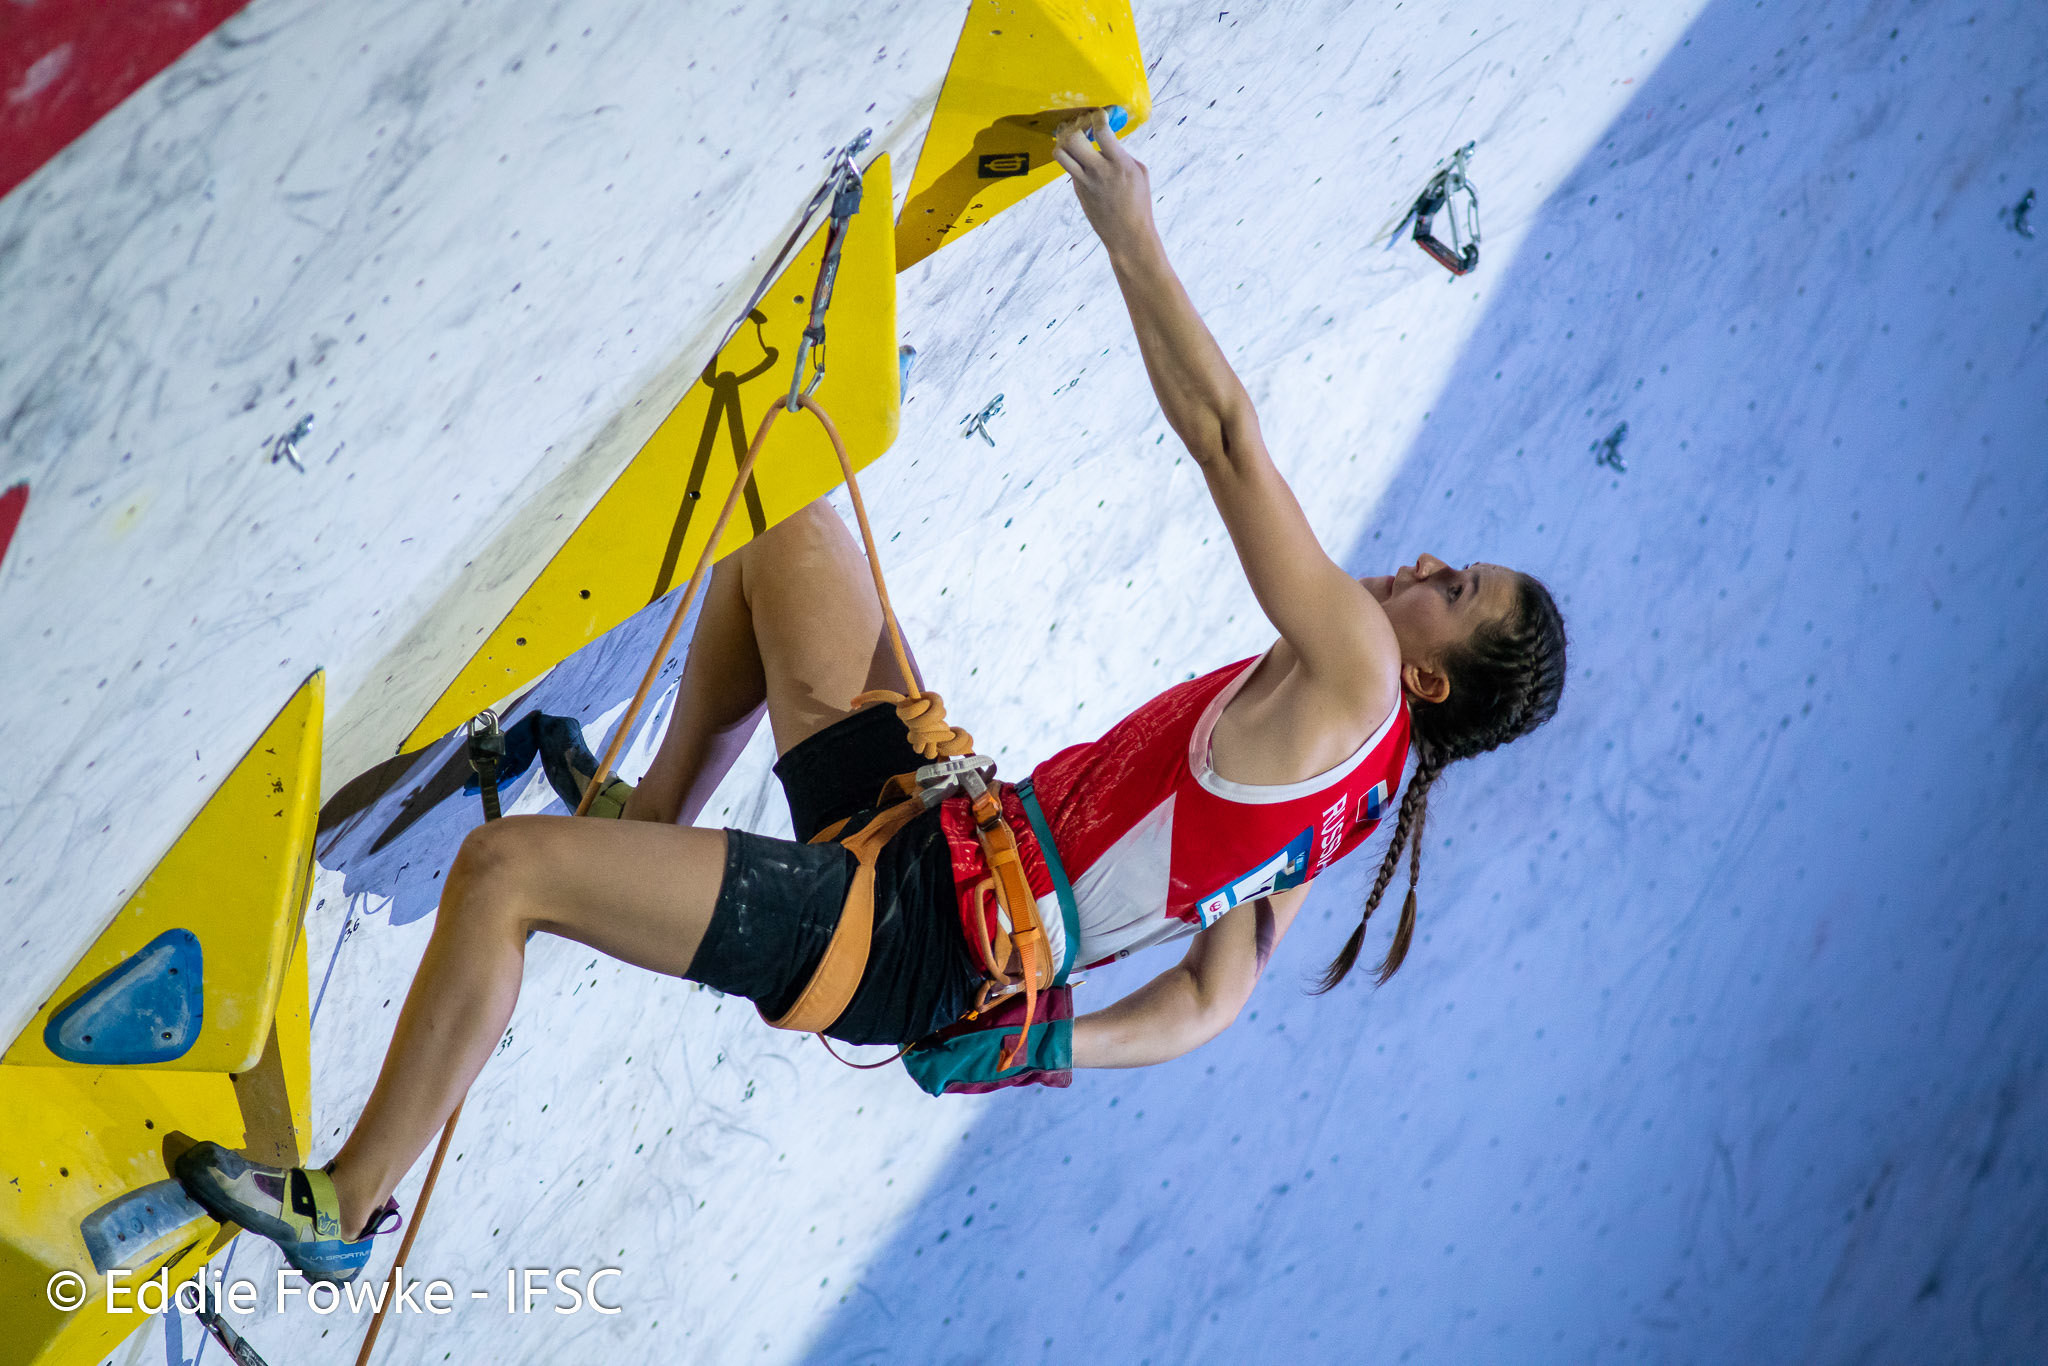 Meshkova continues to impress in lead qualifying at IFSC European Championships